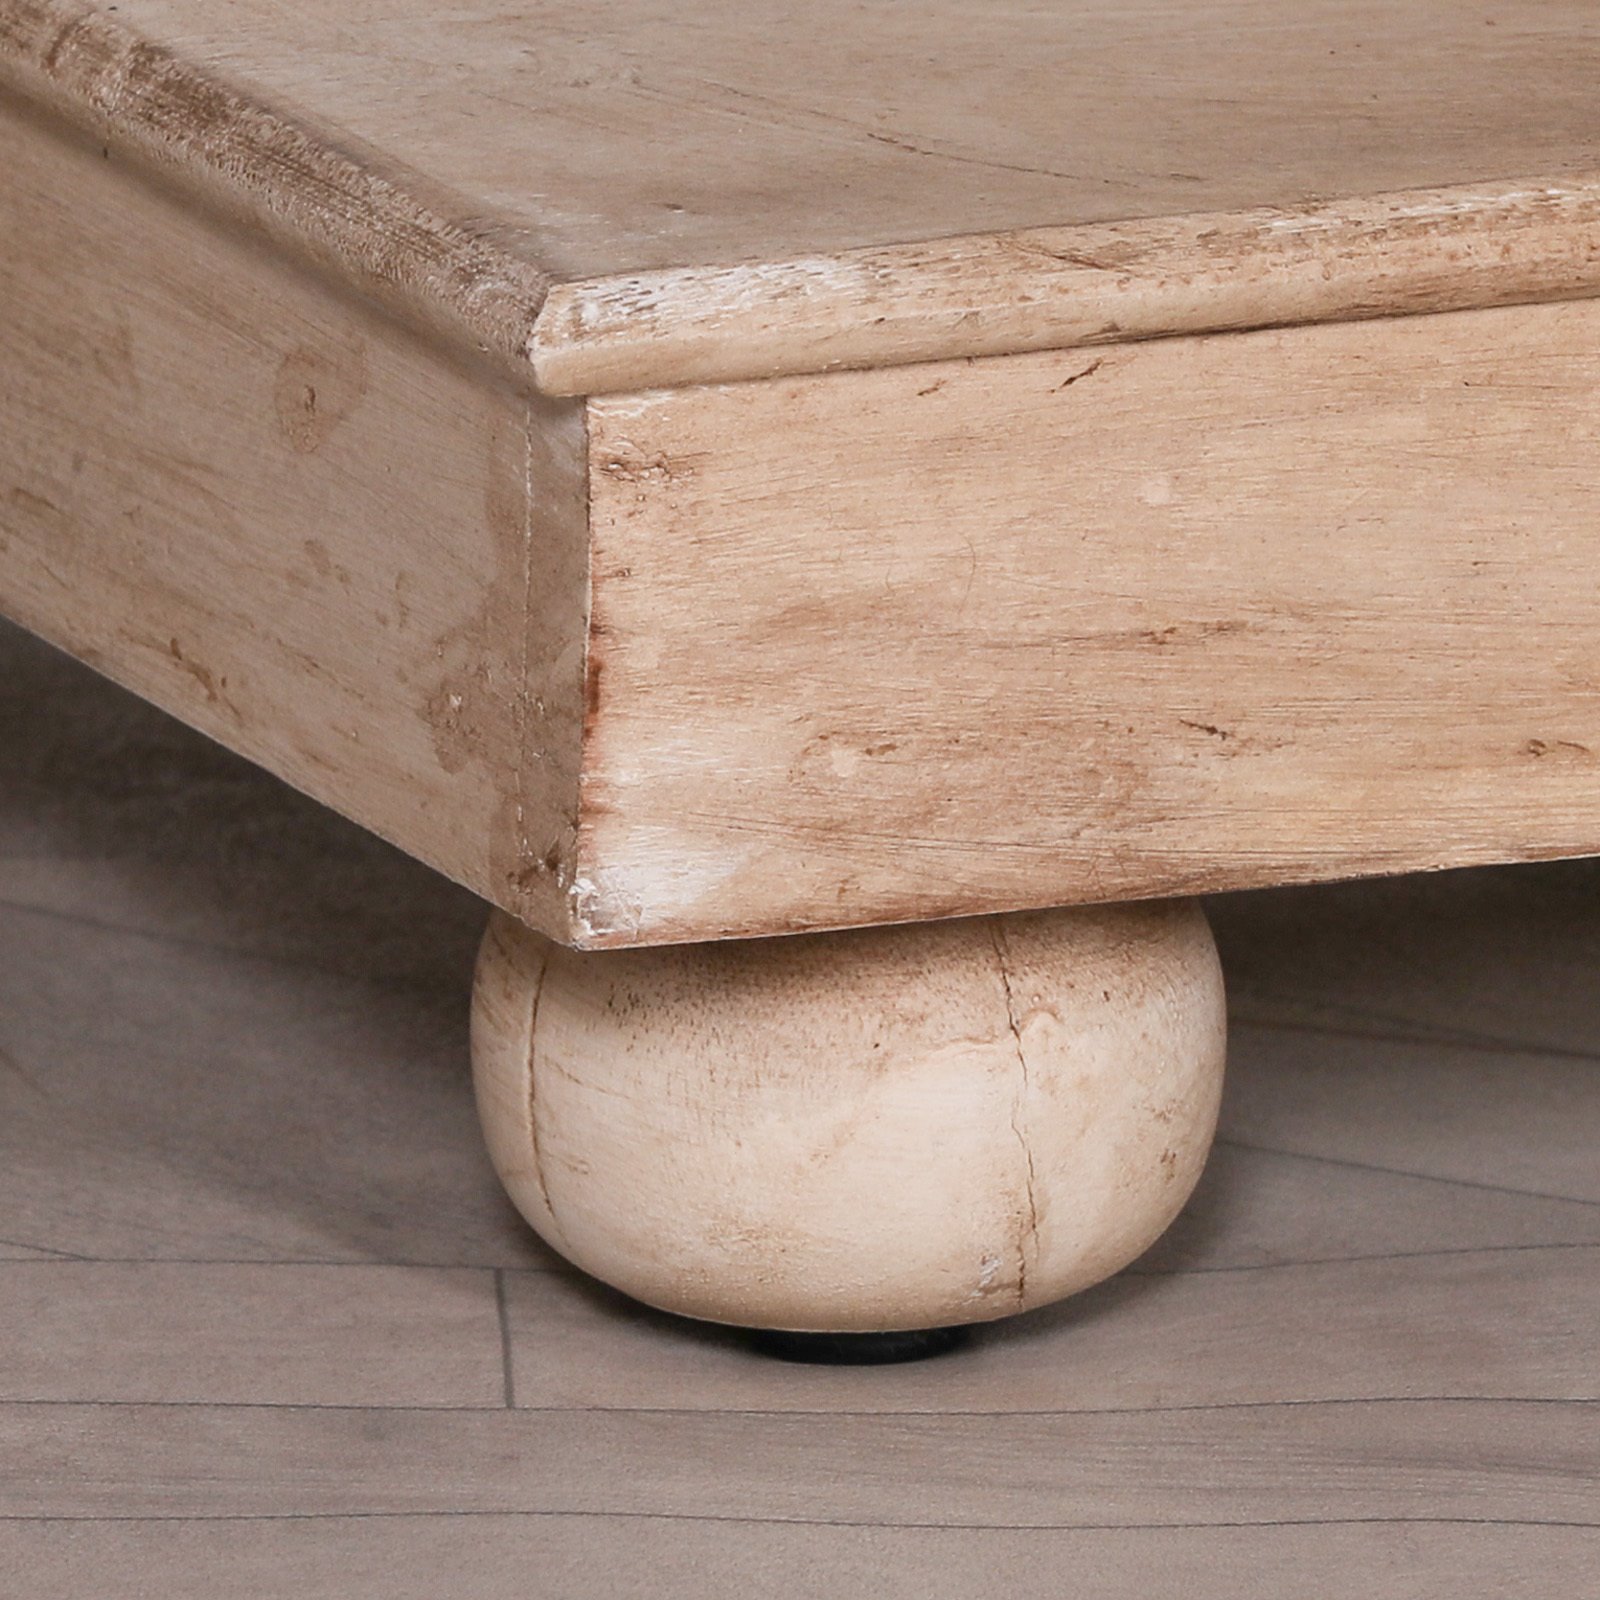 Oakley Natural Console Table Image